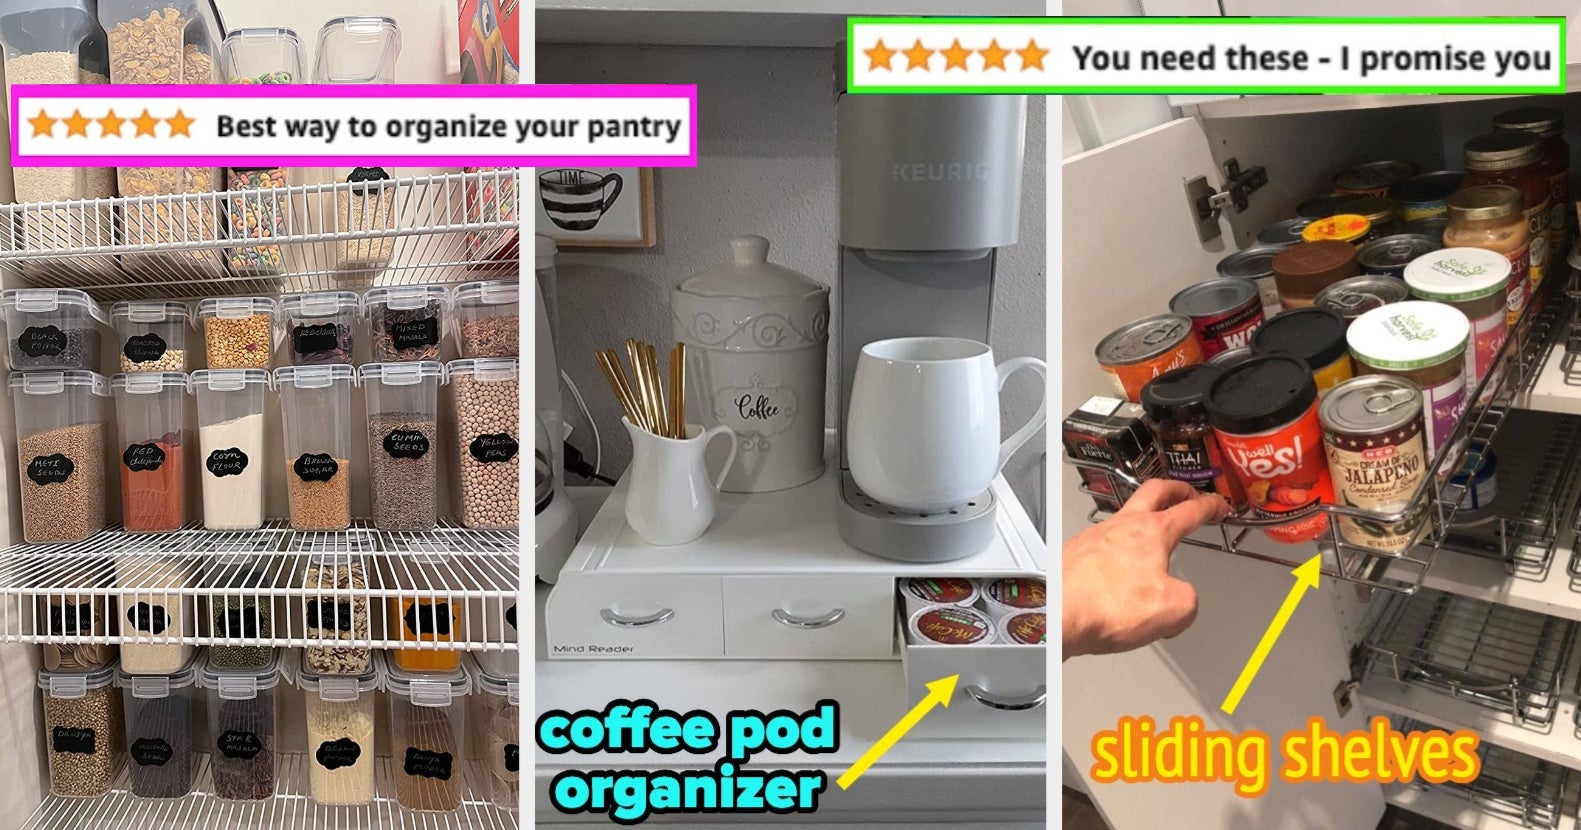 YouCopia Rollout Fridge Caddy Review 2023 (Tested, Photos)